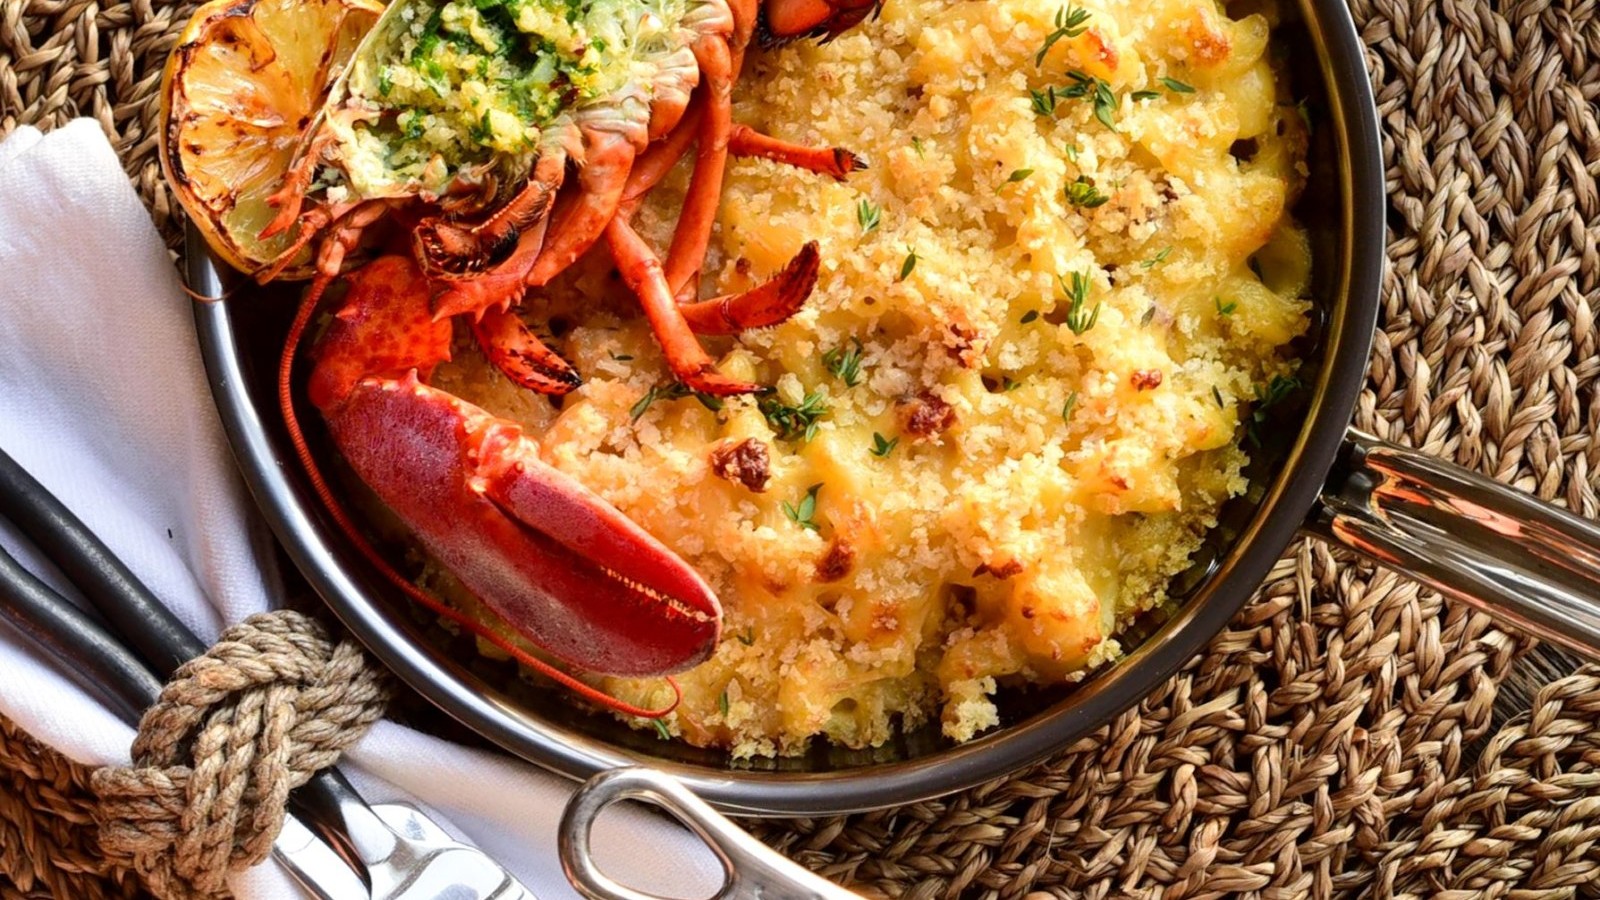 Image of Grilled Lobster Mac & Cheese